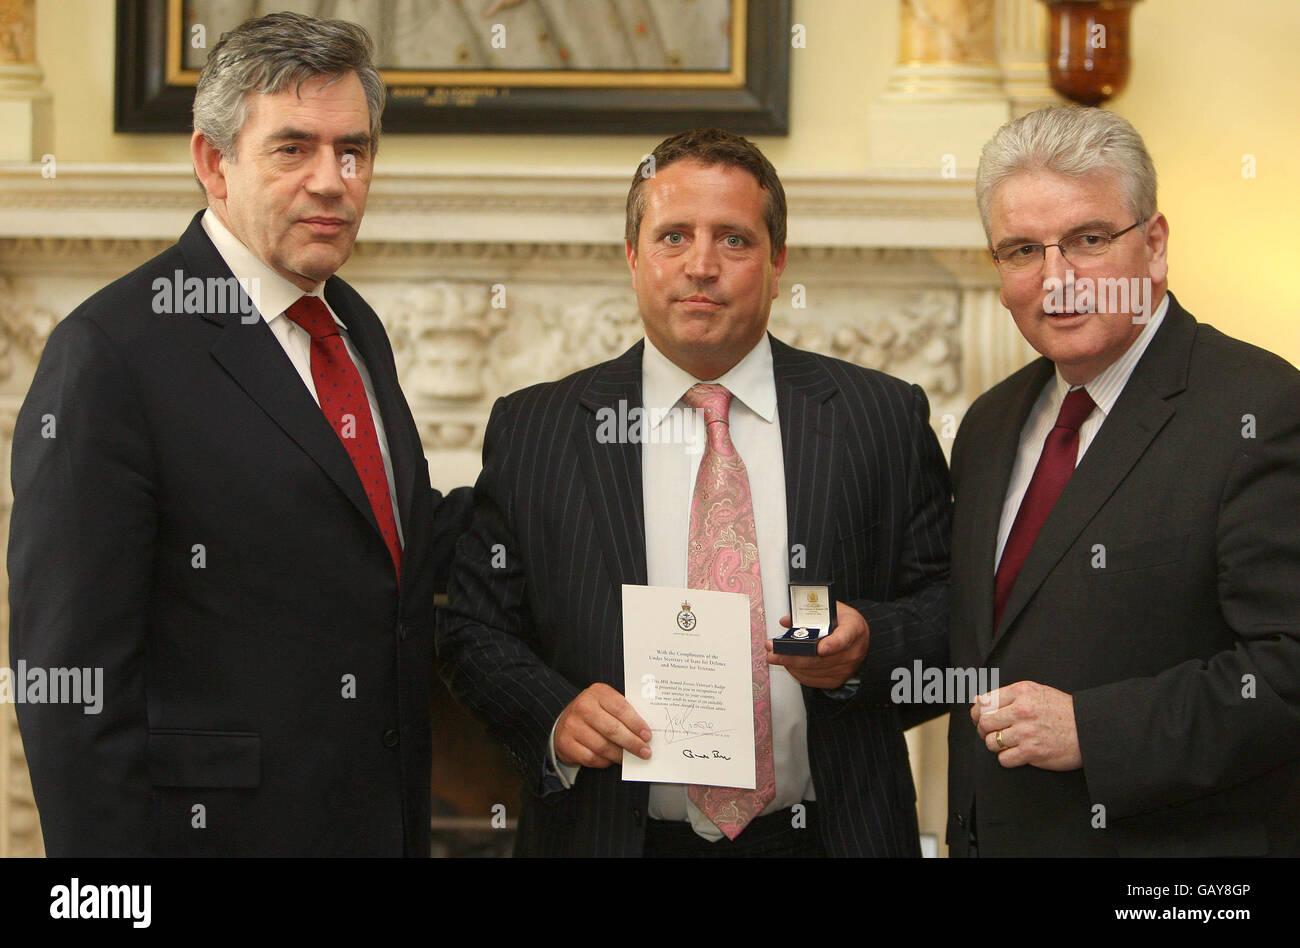 Prime Minister Gordon Brown and Defence Secretary Des Browne present a Veterans Award to Chris Burns, Royal Corp of Transport, at a Downing Street reception ahead of Veterans Day on June 27th. Stock Photo